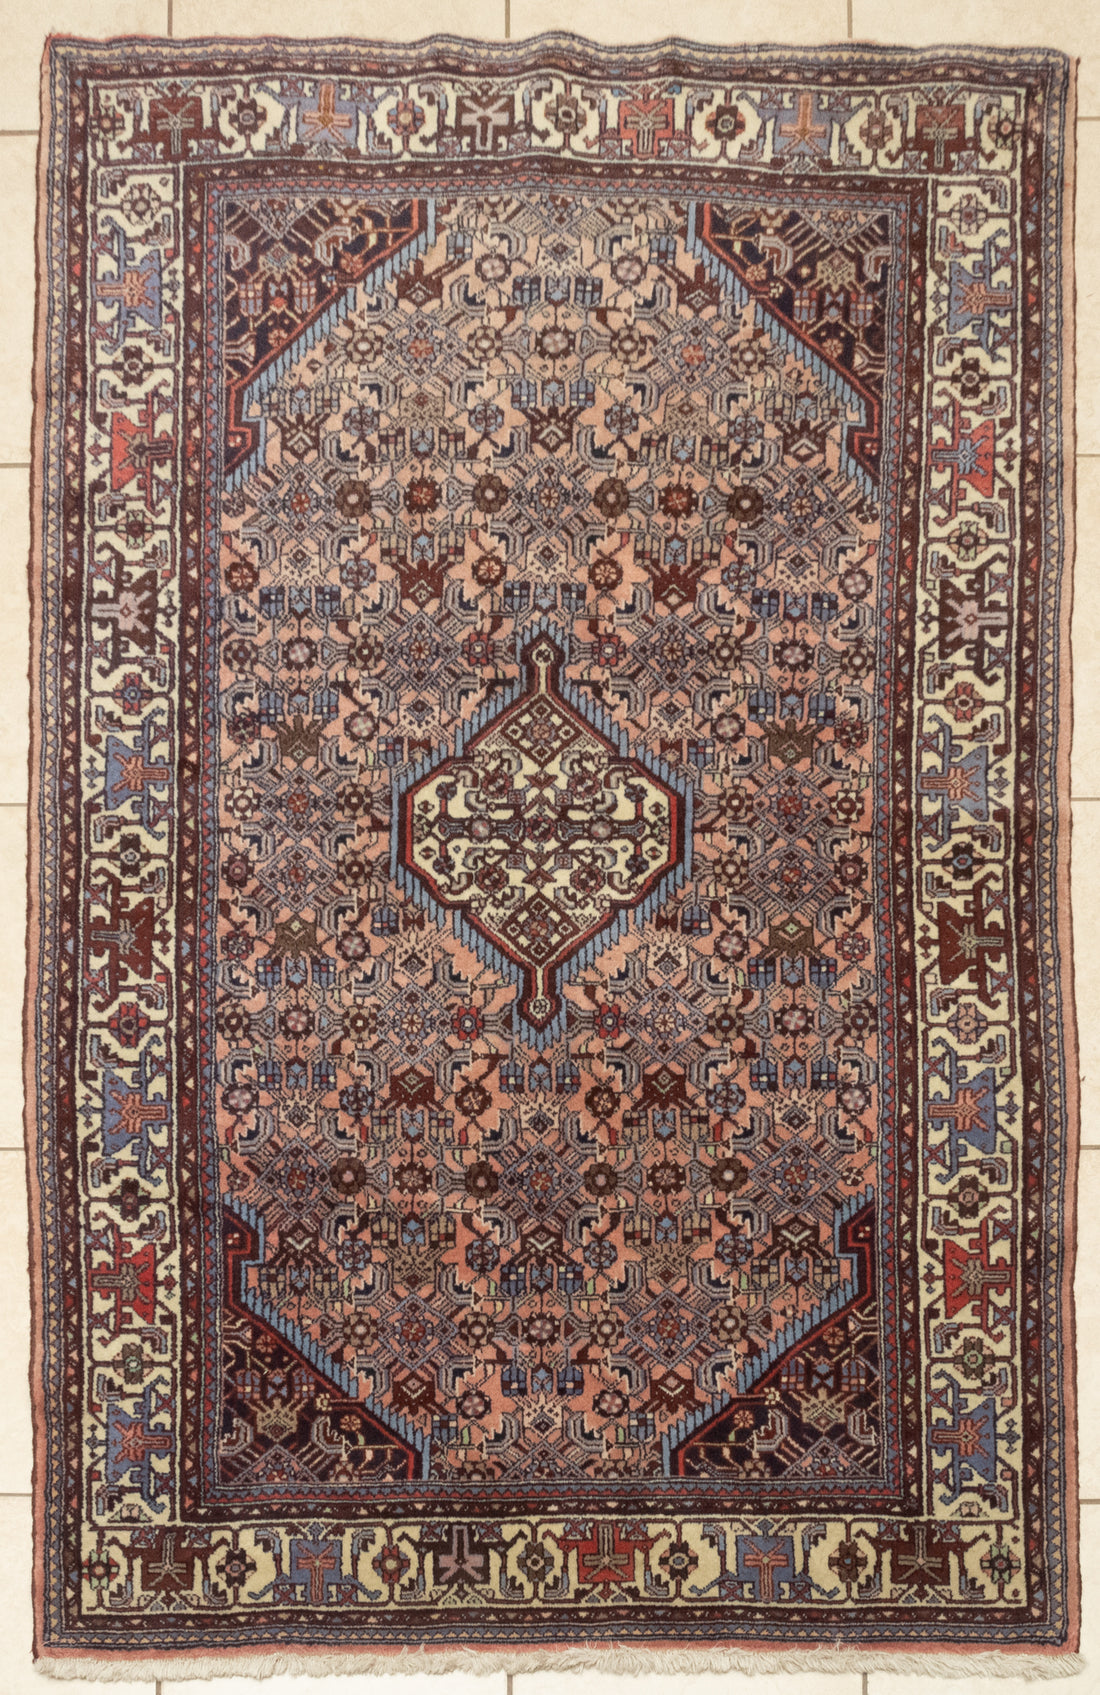 BAYAT NOMAD Hand-Knotted Wool Rug Wool 7'1" x 4'6"